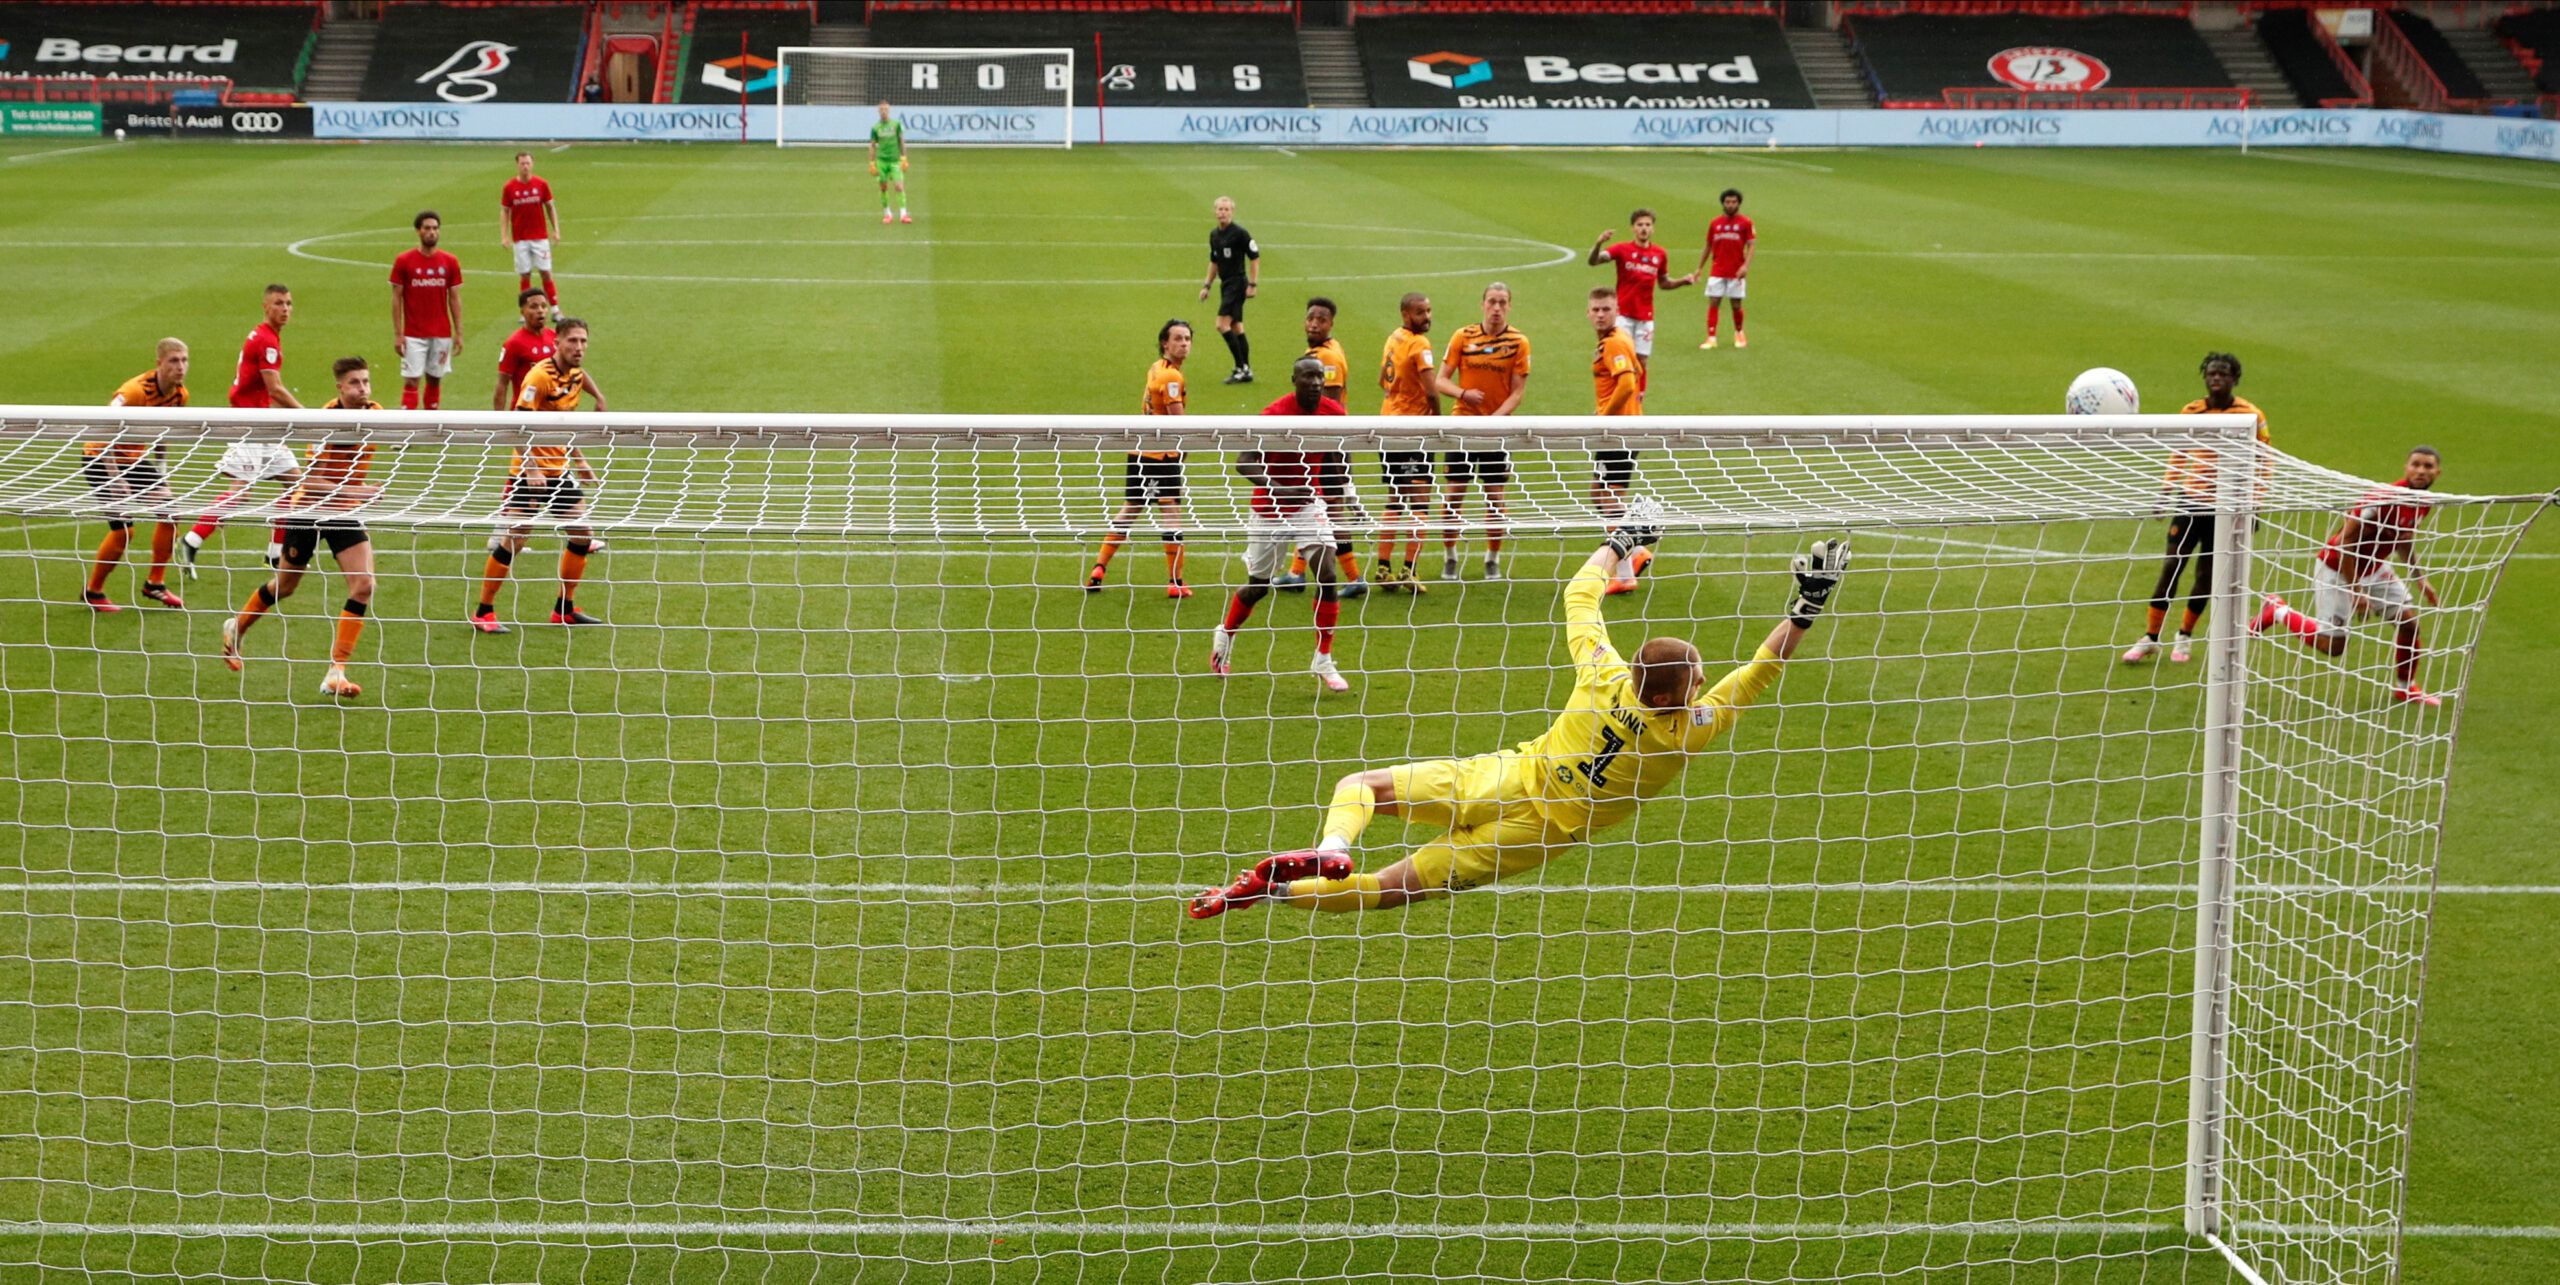 Soccer Football - Championship - Bristol City v Hull City - Ashton Gate Stadium, Bristol, Britain - July 8, 2020  Bristol City's Jamie Paterson scores their second goal, as play resumes behind closed doors following the outbreak of the coronavirus disease (COVID-19)  Action Images/John Sibley  EDITORIAL USE ONLY. No use with unauthorized audio, video, data, fixture lists, club/league logos or 